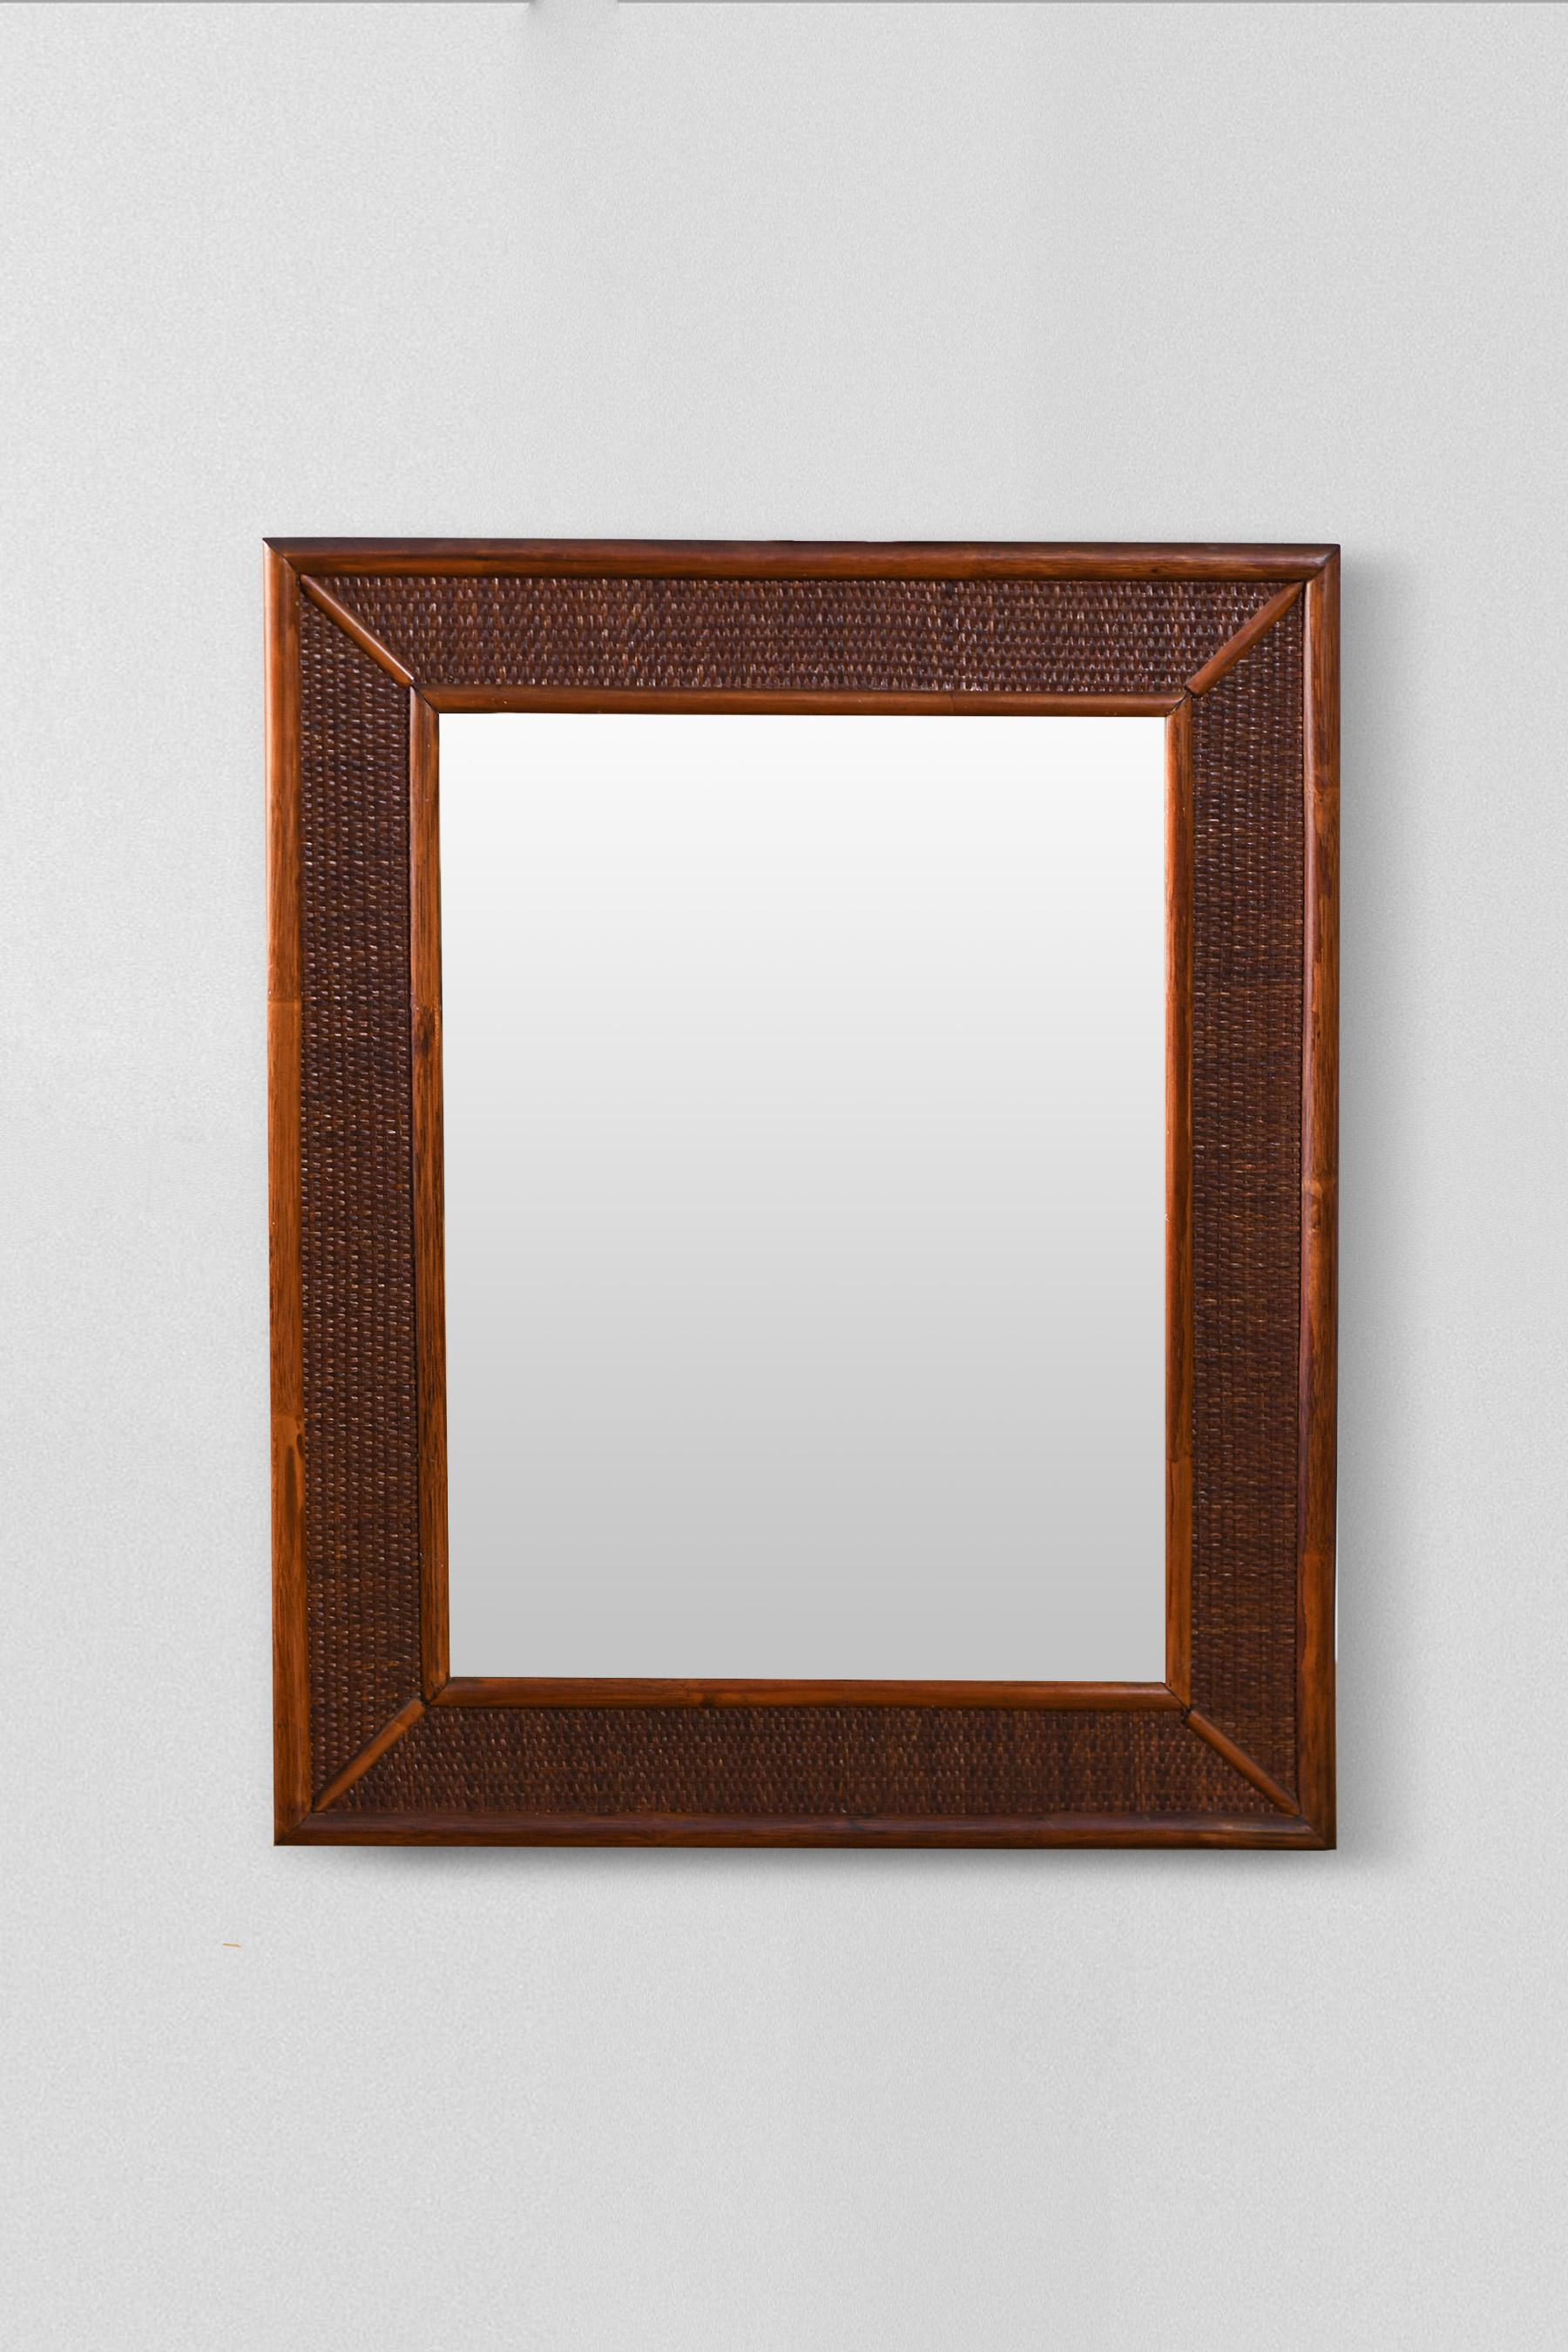 Mirror in wicker and dark rush, Italy 1980
Product details
Dimensions: 64 W x 81 H x 2 D